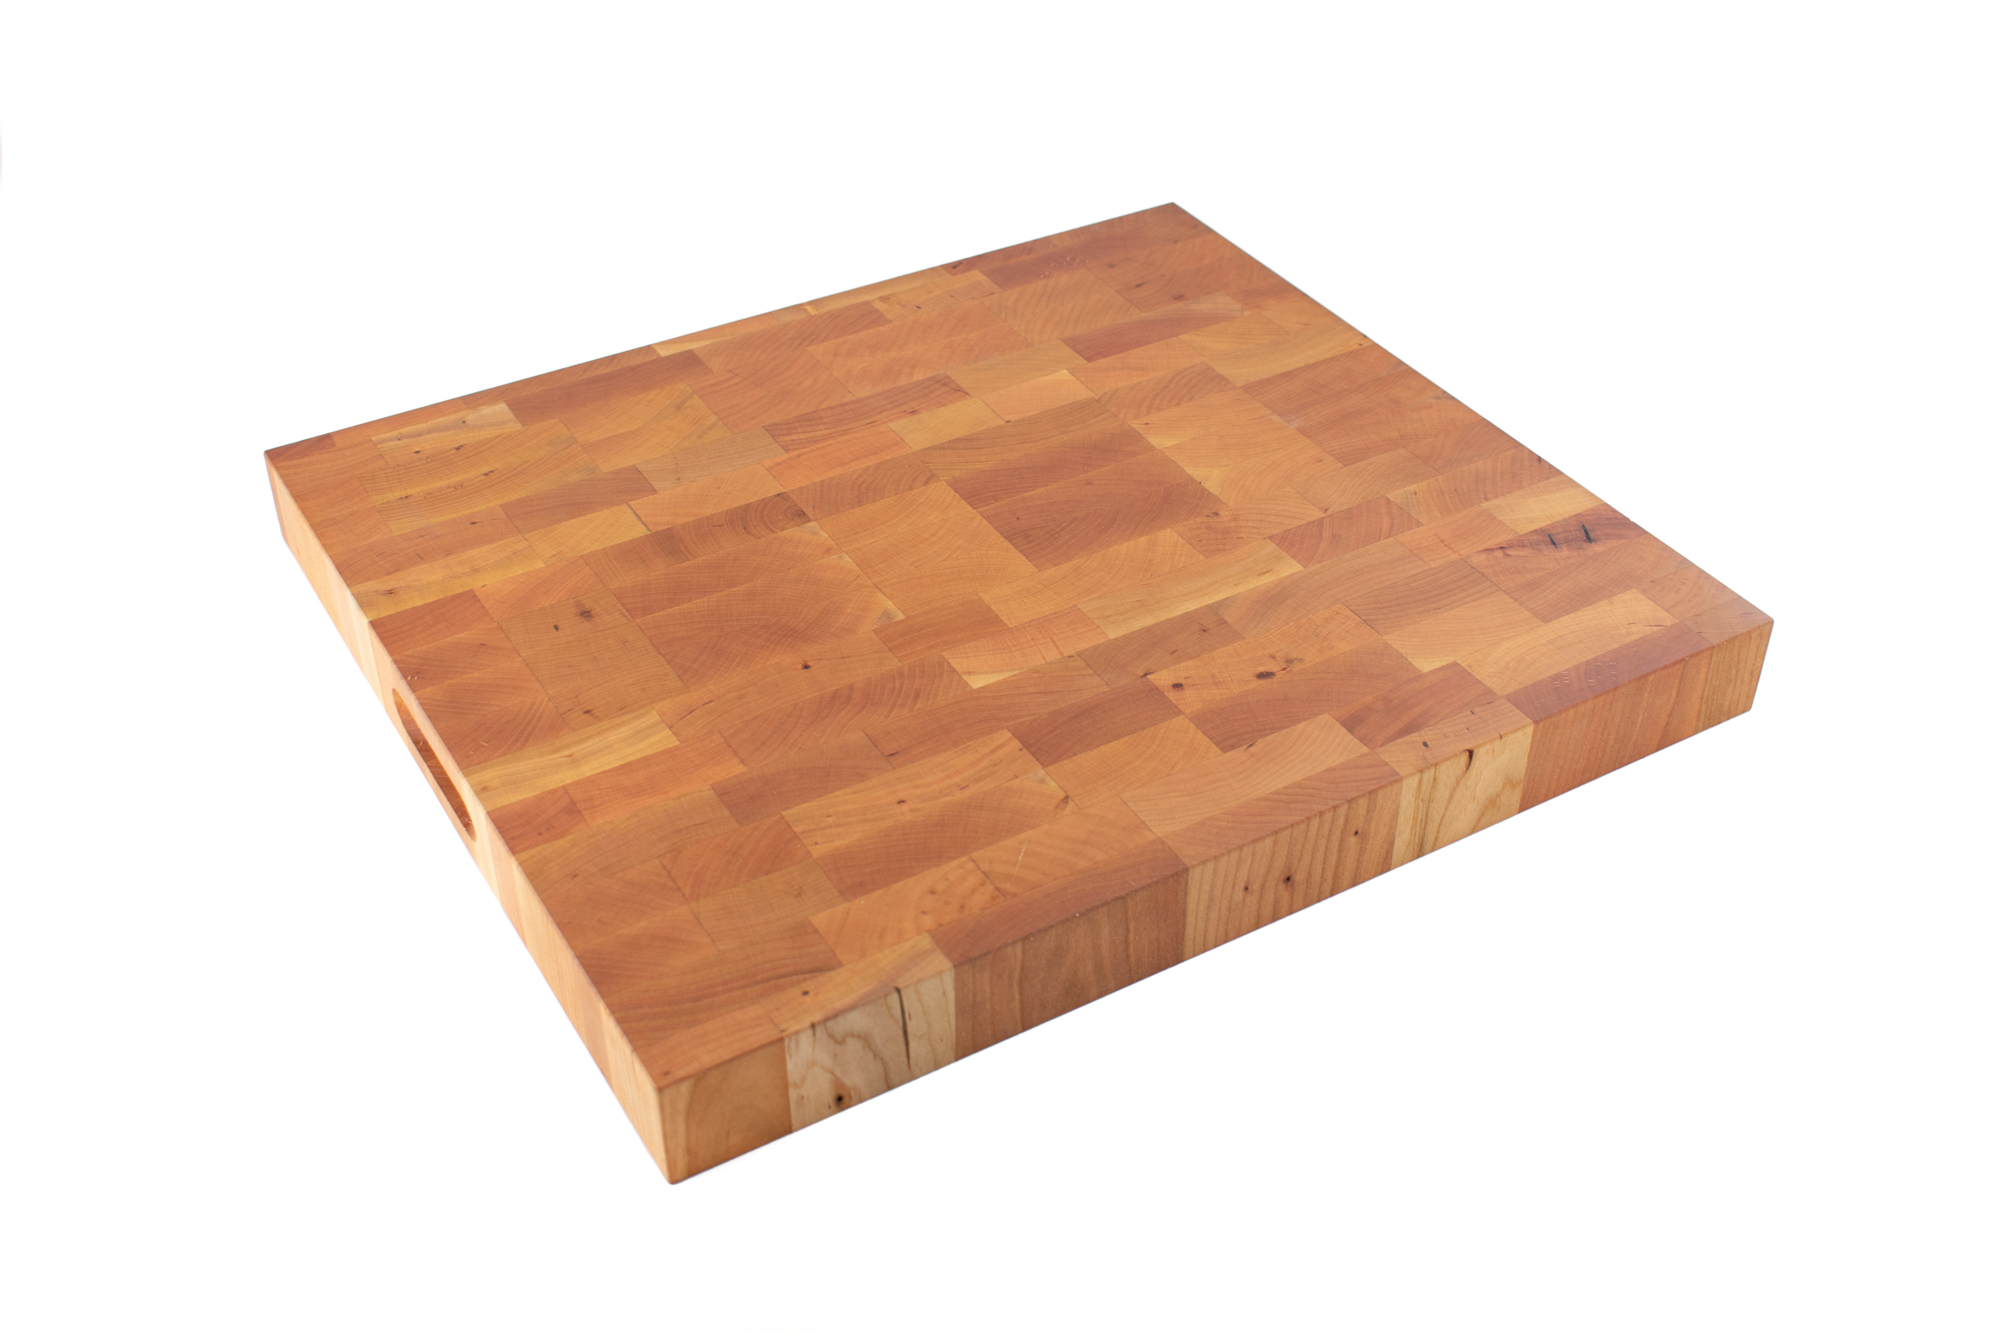 Large Cherry End grain butcher block with side handle indents 